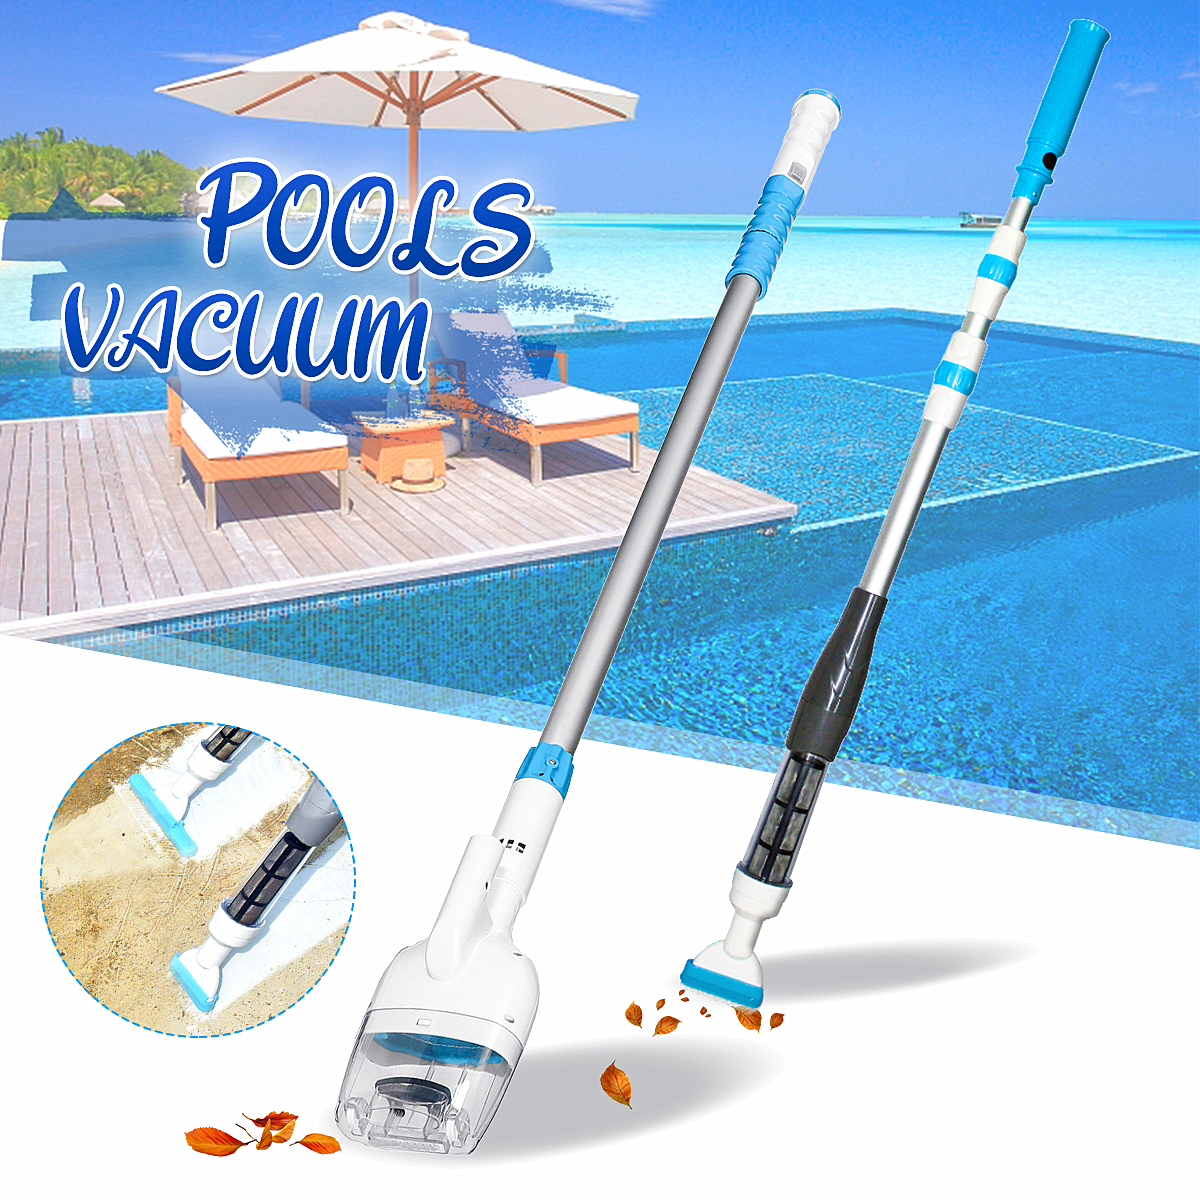 Handheld-Cordless-Swimming-Pool-Vacuum-Cleaner-Waterproof-IPX8-Rechargeable-Vac-Above-Ground-Cleanin-1559729-1